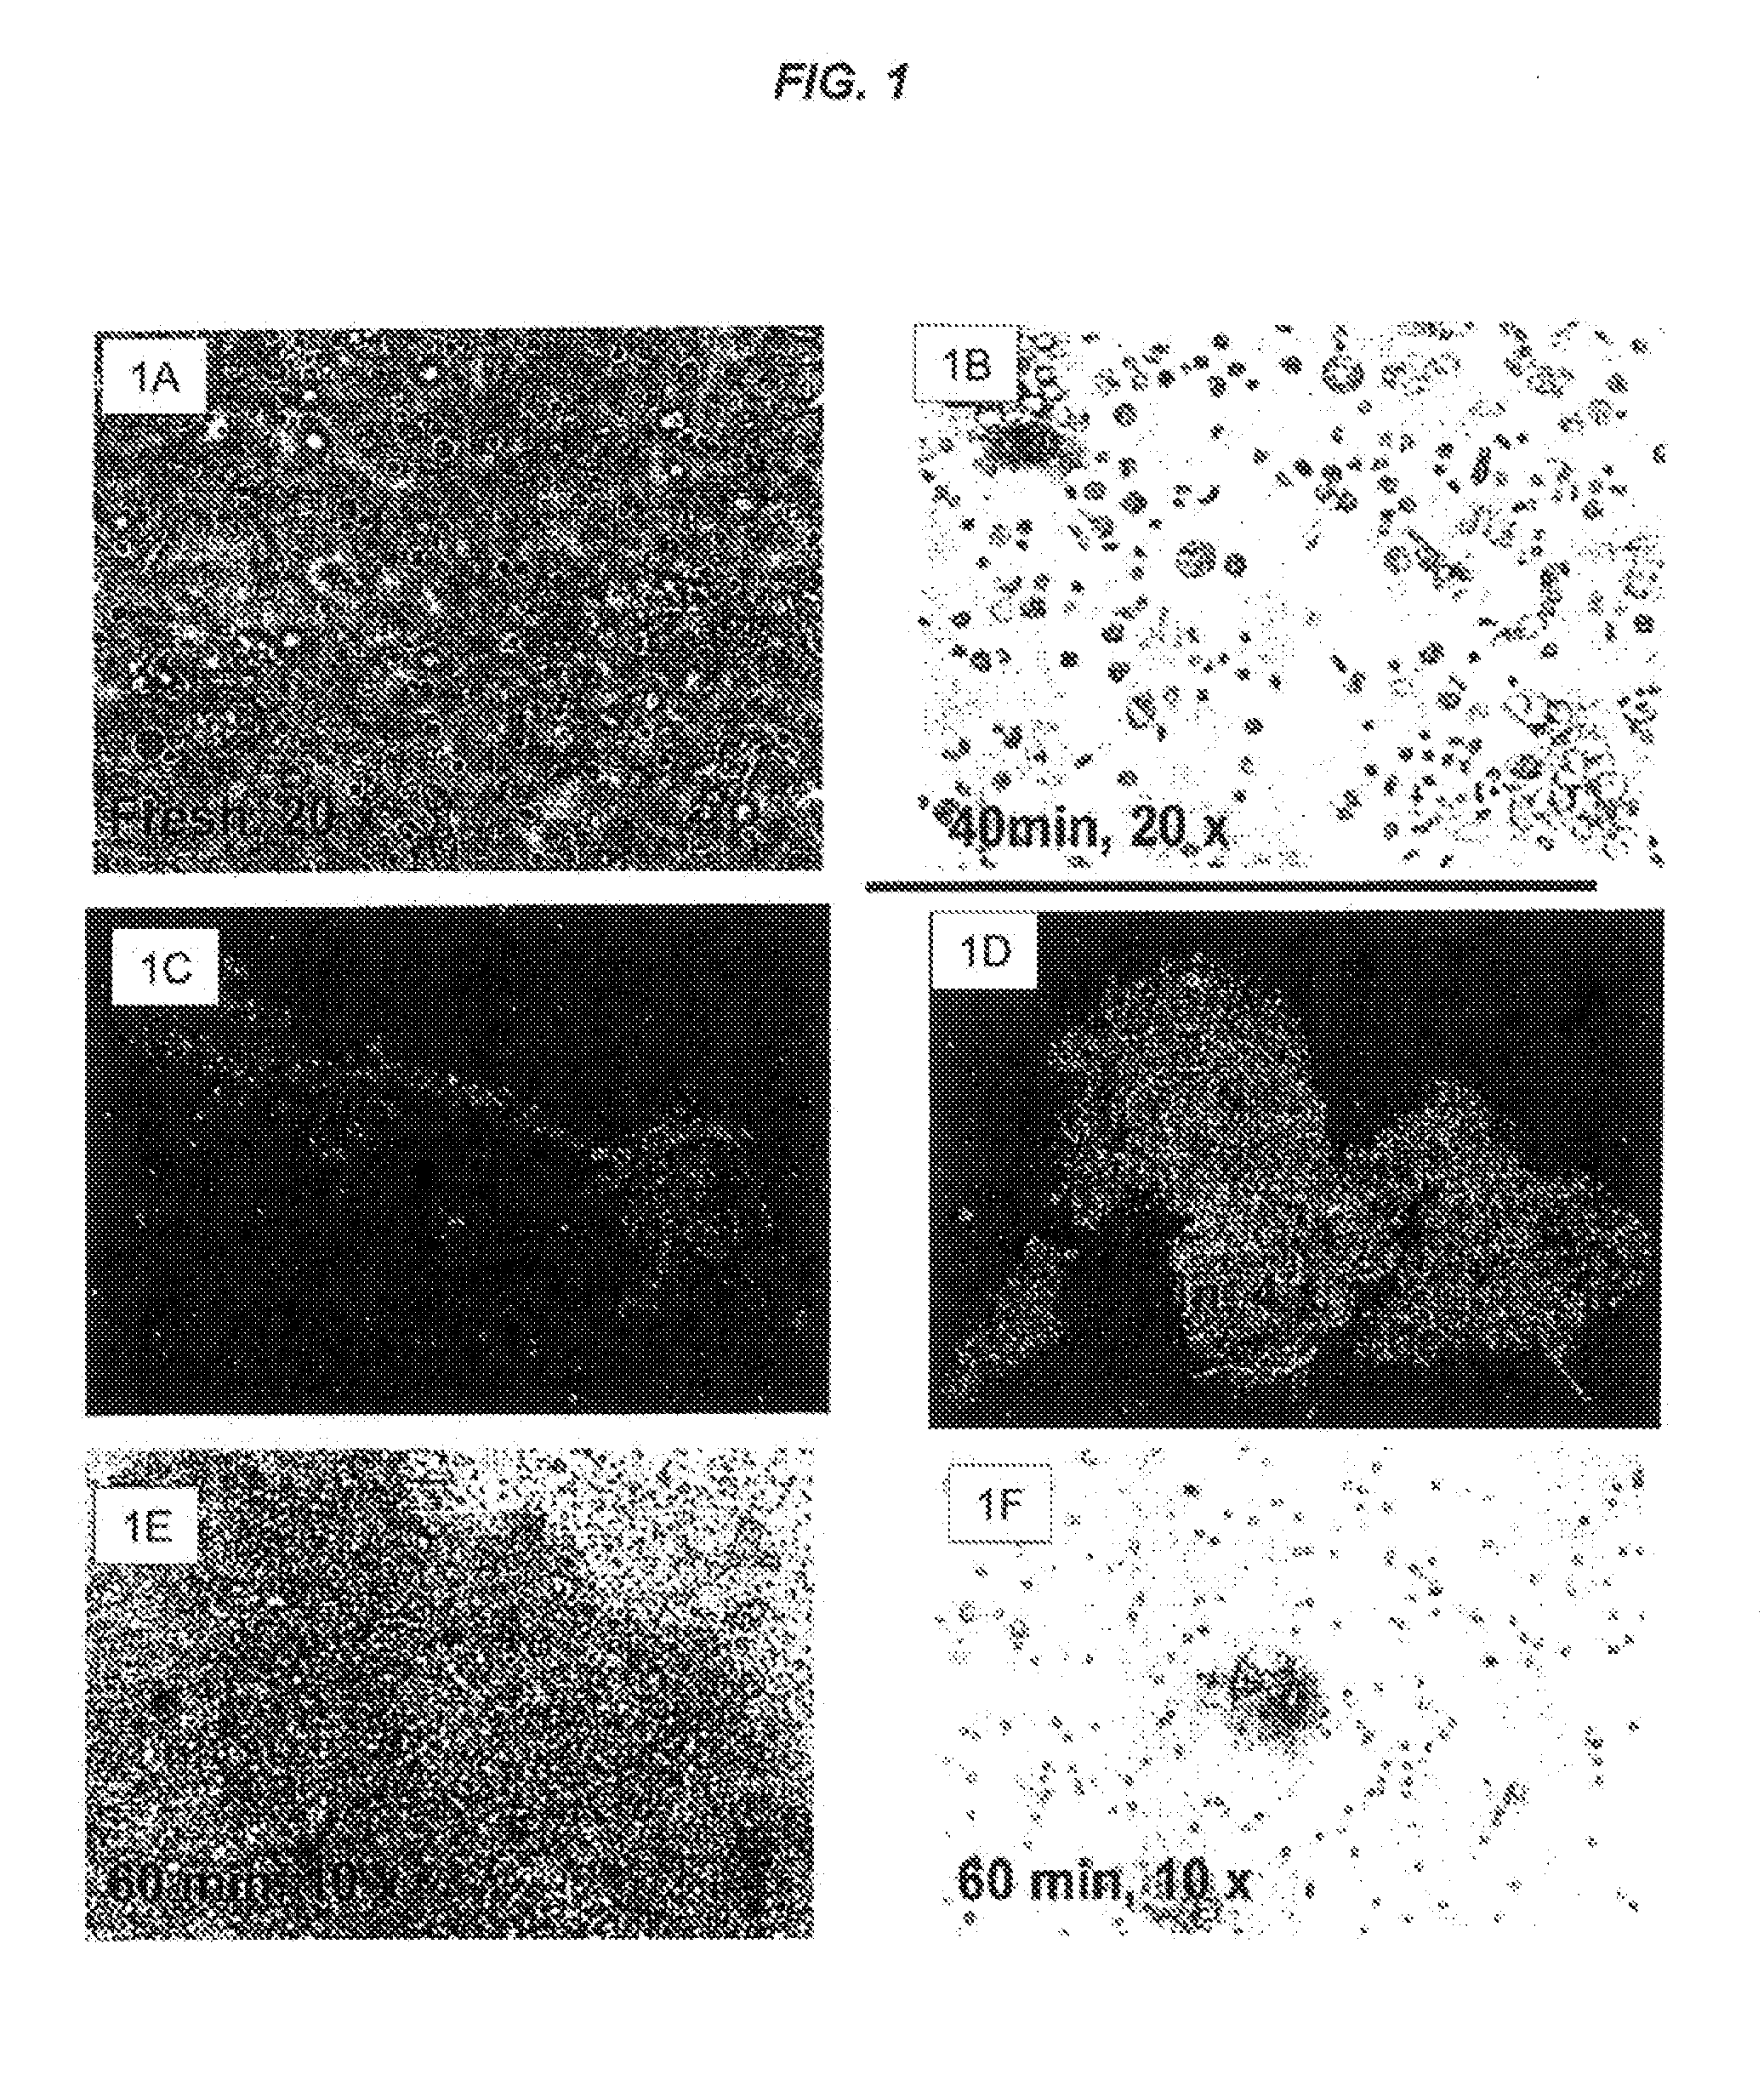 Methods for preventing aggregation of adipose stromal cells